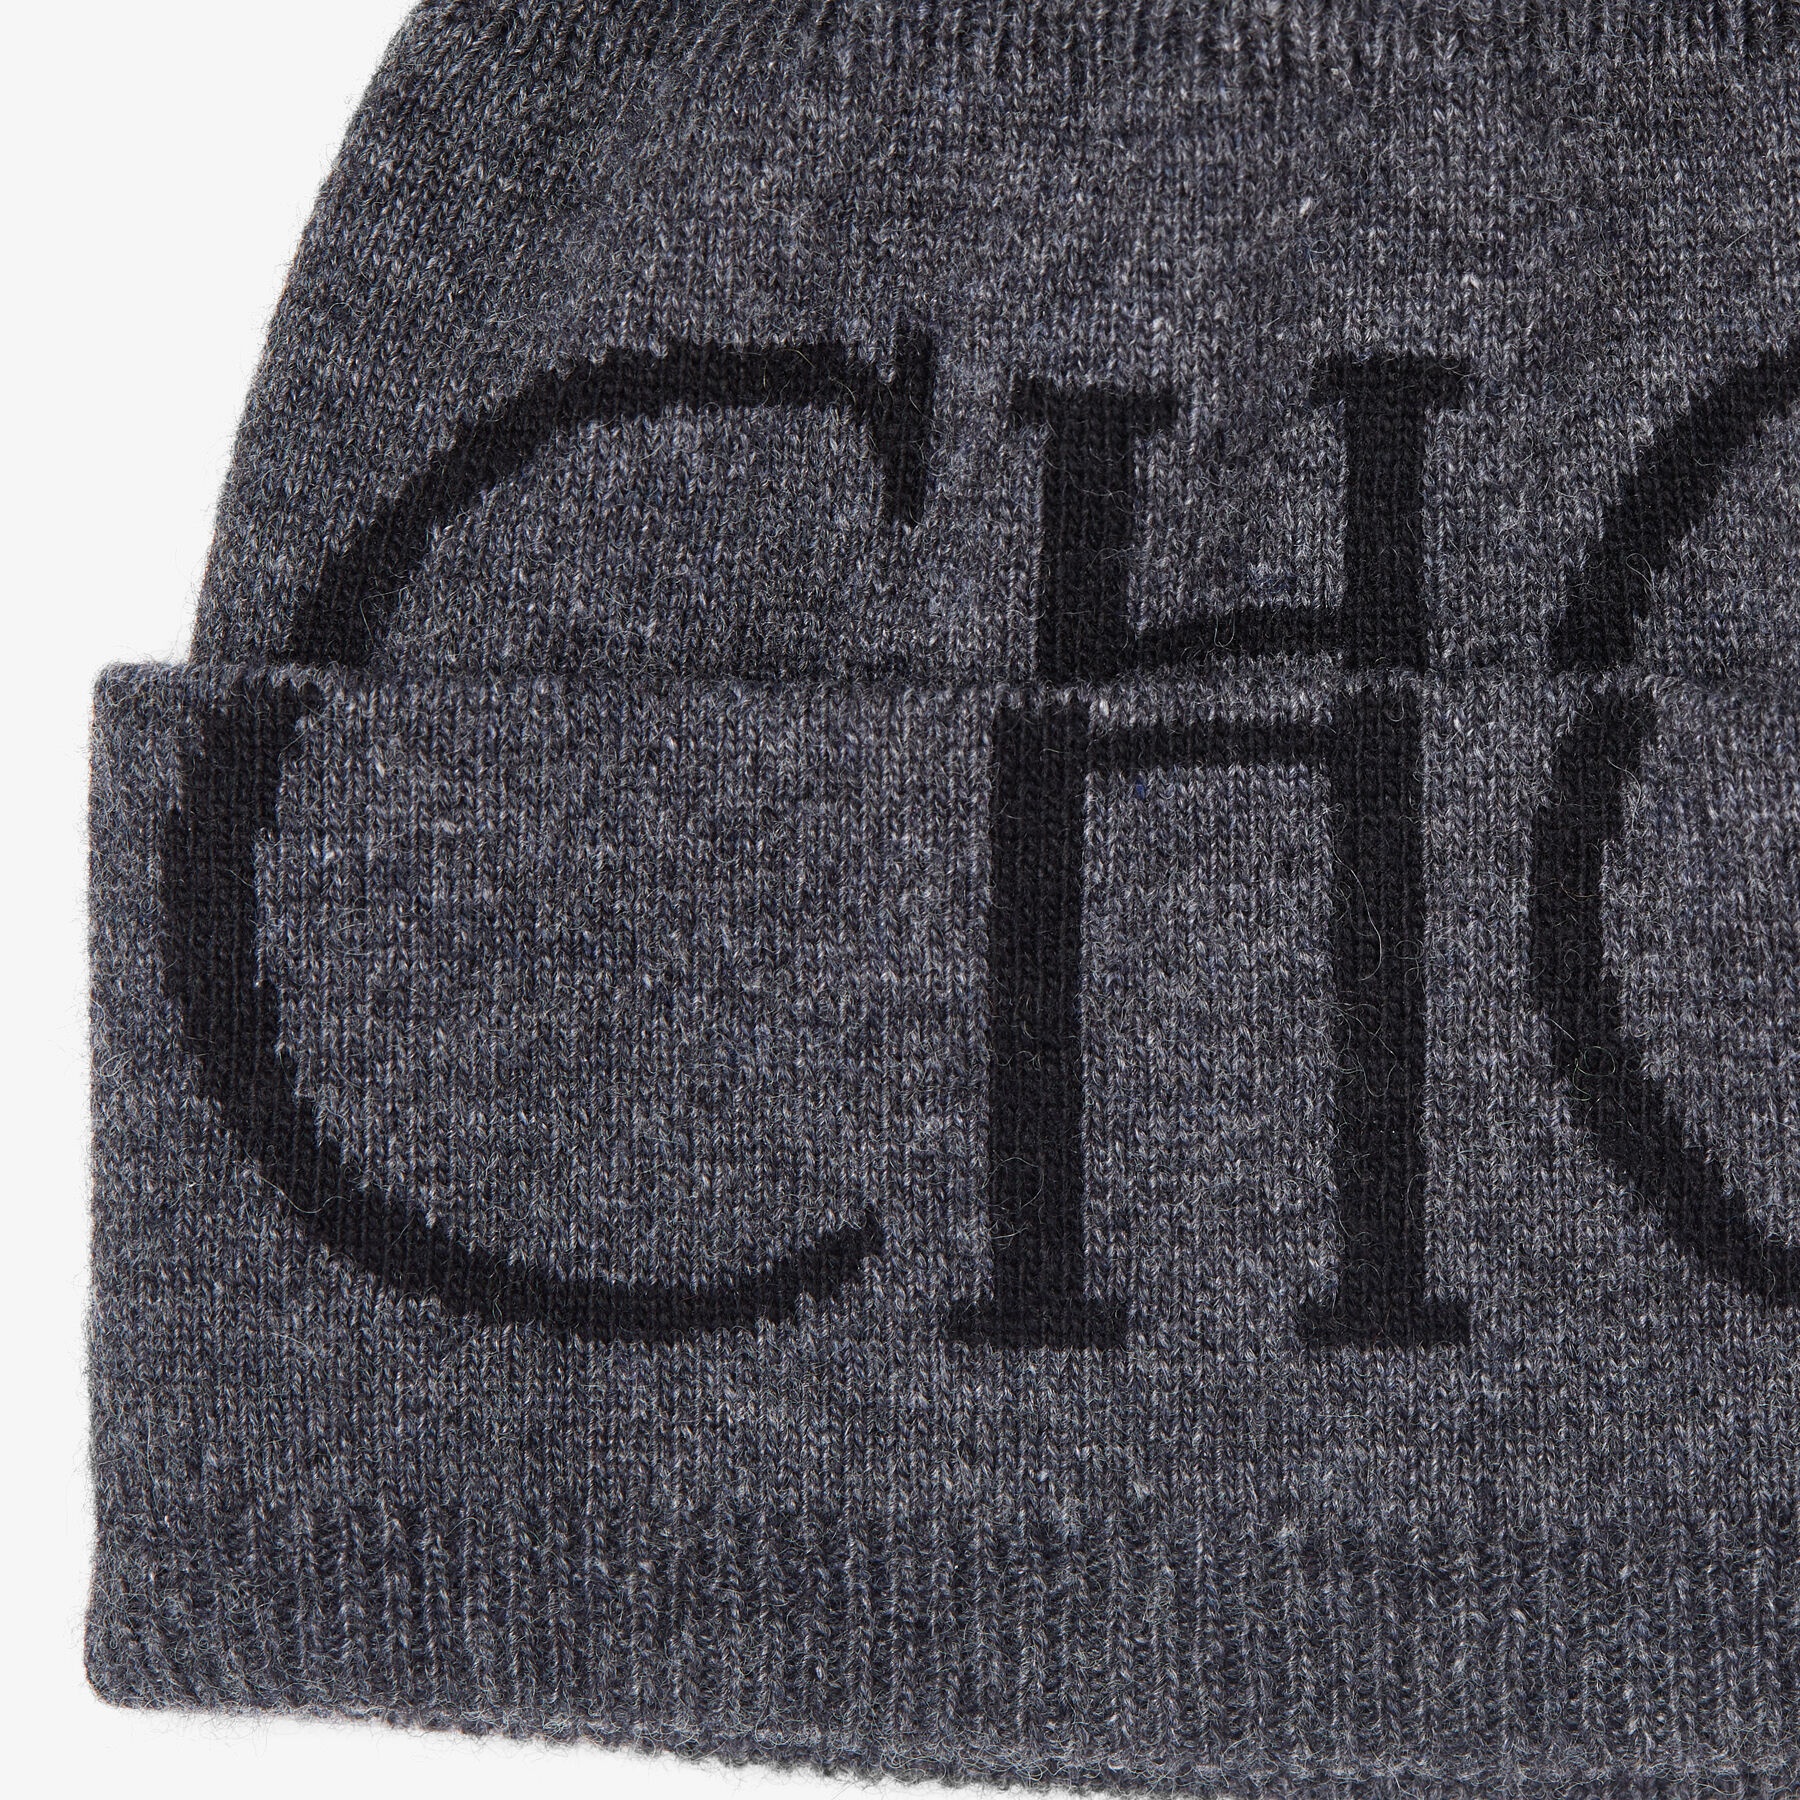 Jens
Marl Grey Wool and Cashmere Hat with Black Jimmy Choo Logo - 3